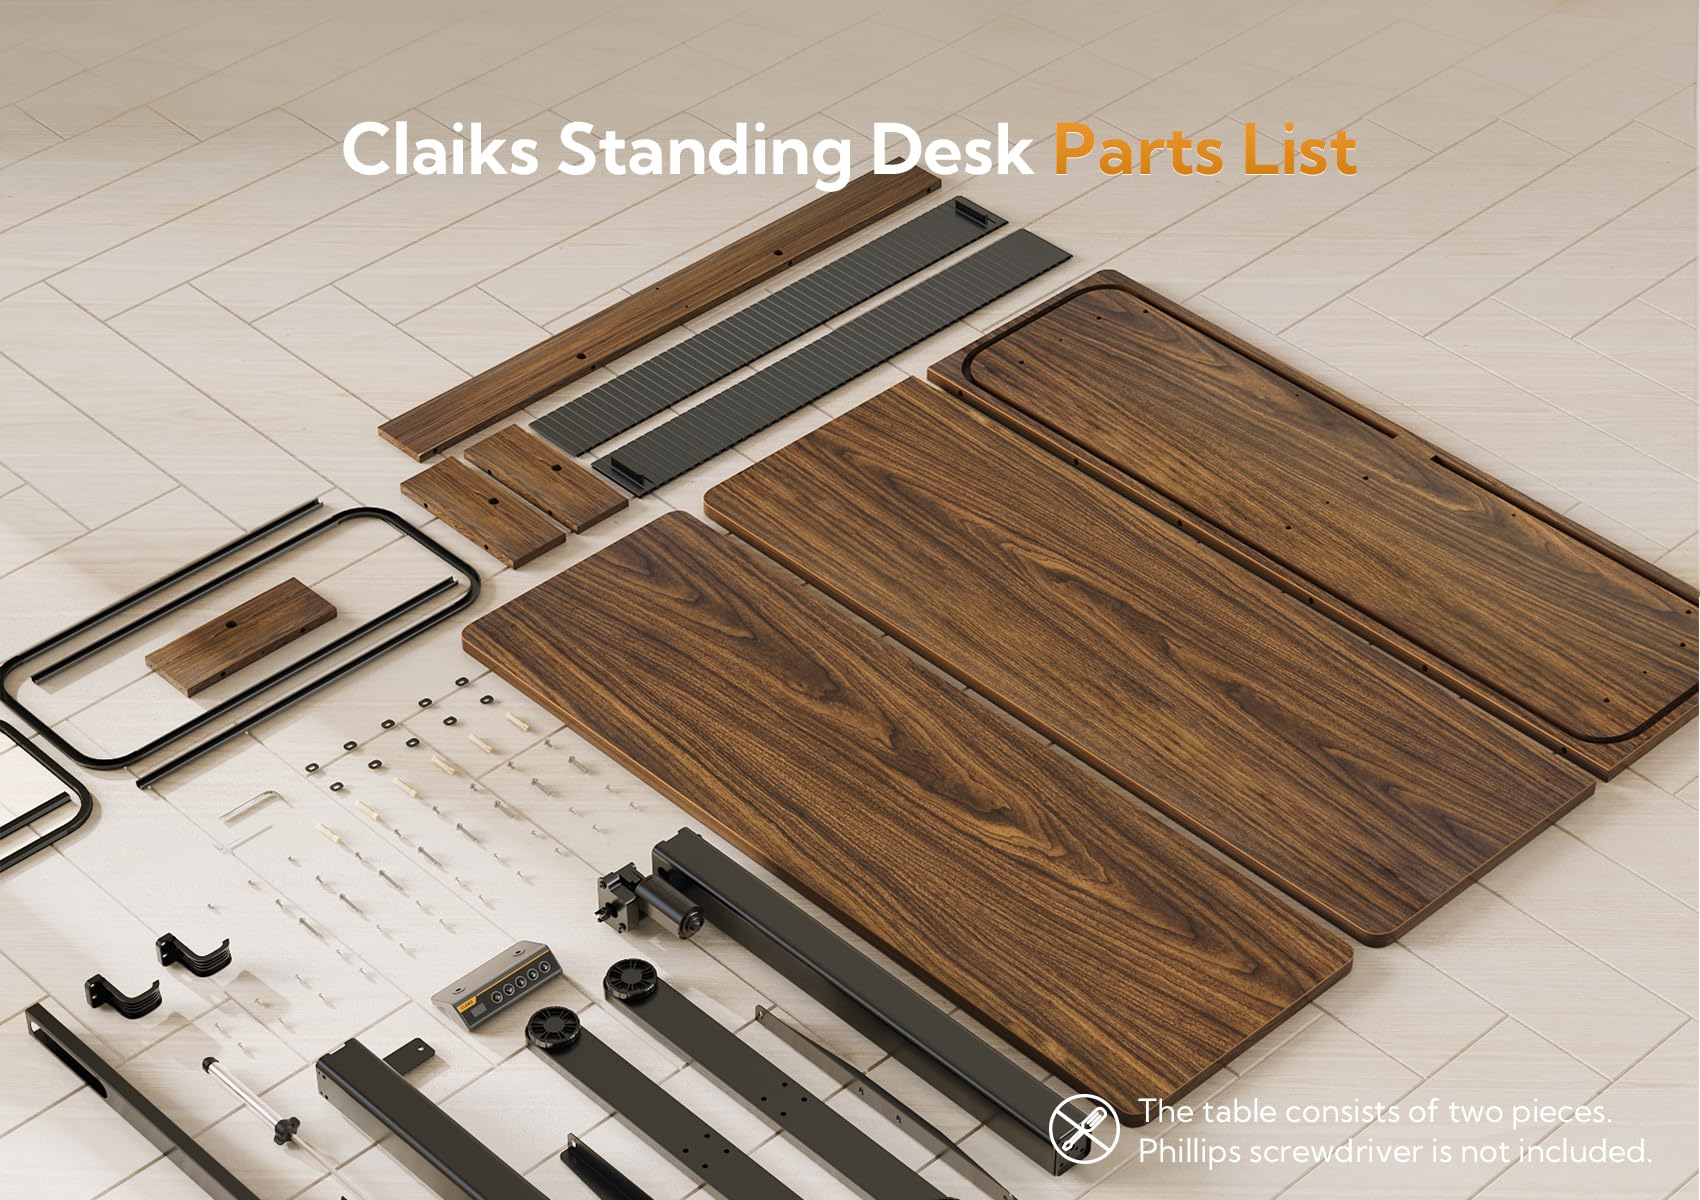 Claiks Standing Desk with Tambour, Electric Standing Desk Adjustable Height, Adjustable Standing Desk with Storage Shelves, 48 Inch Walnut